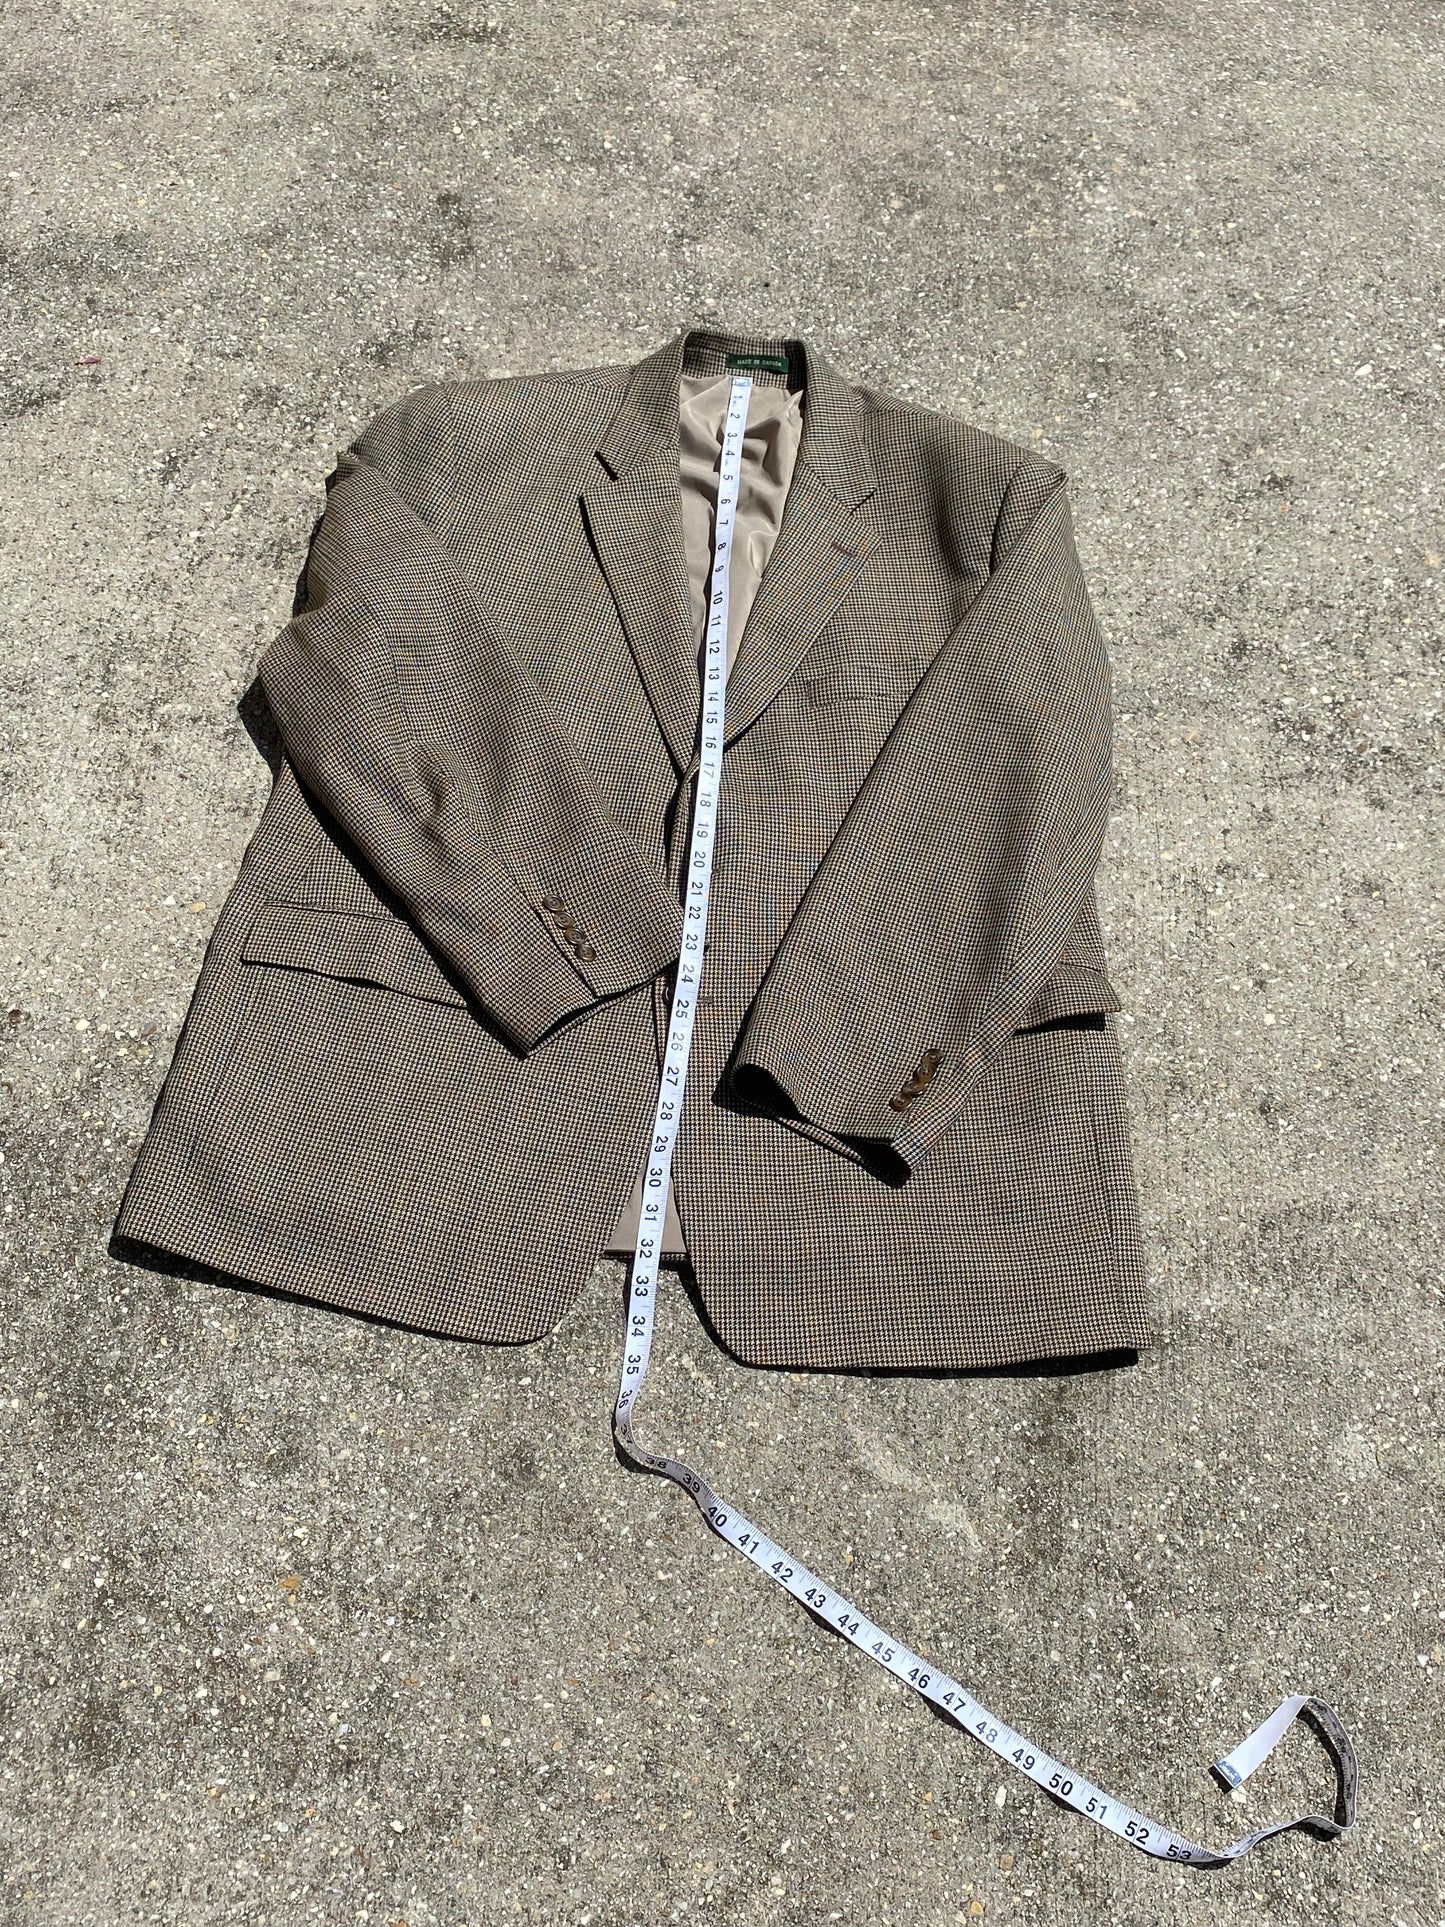 Polo Ralph Lauren Brown Houndstooth Jacket - Brimm Archive Wardrobe Research